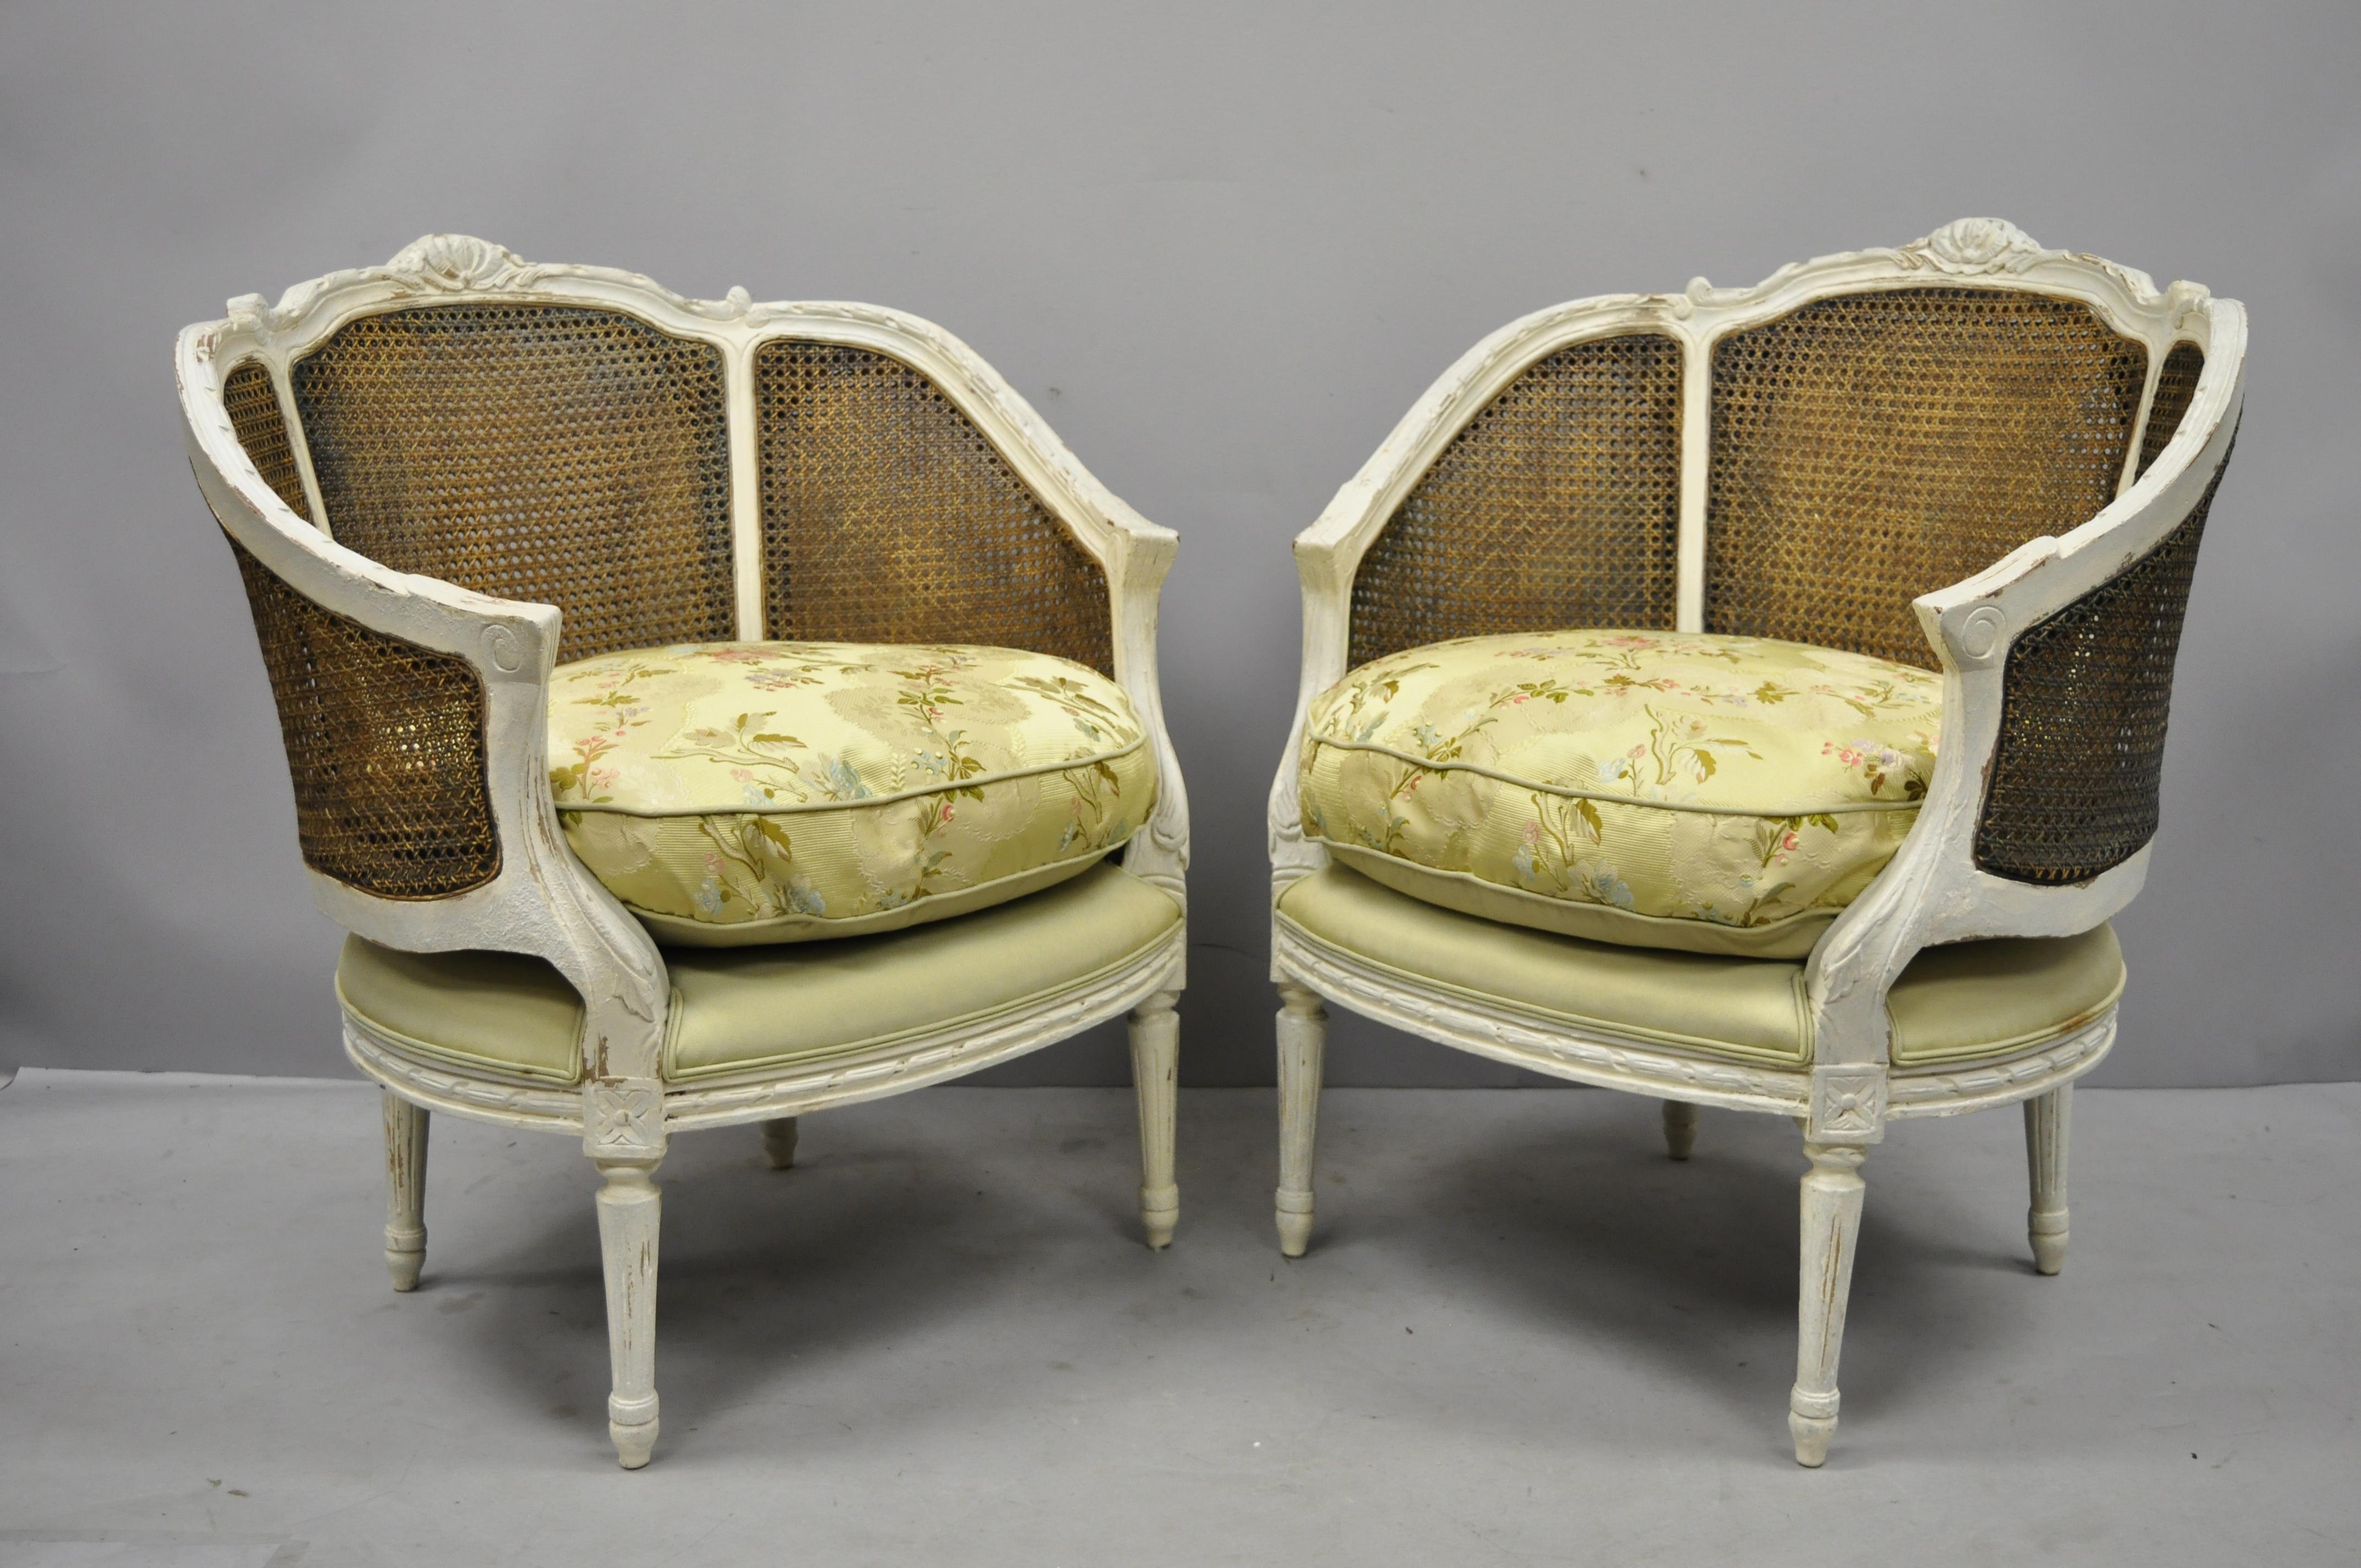 Pair of caned French Louis XVI style white distress painted Bergere salon chairs. Items feature cane backs, white painted distressed finish, loose cushions, solid wood construction, tapered legs, great style and form, circa Mid-20th century.